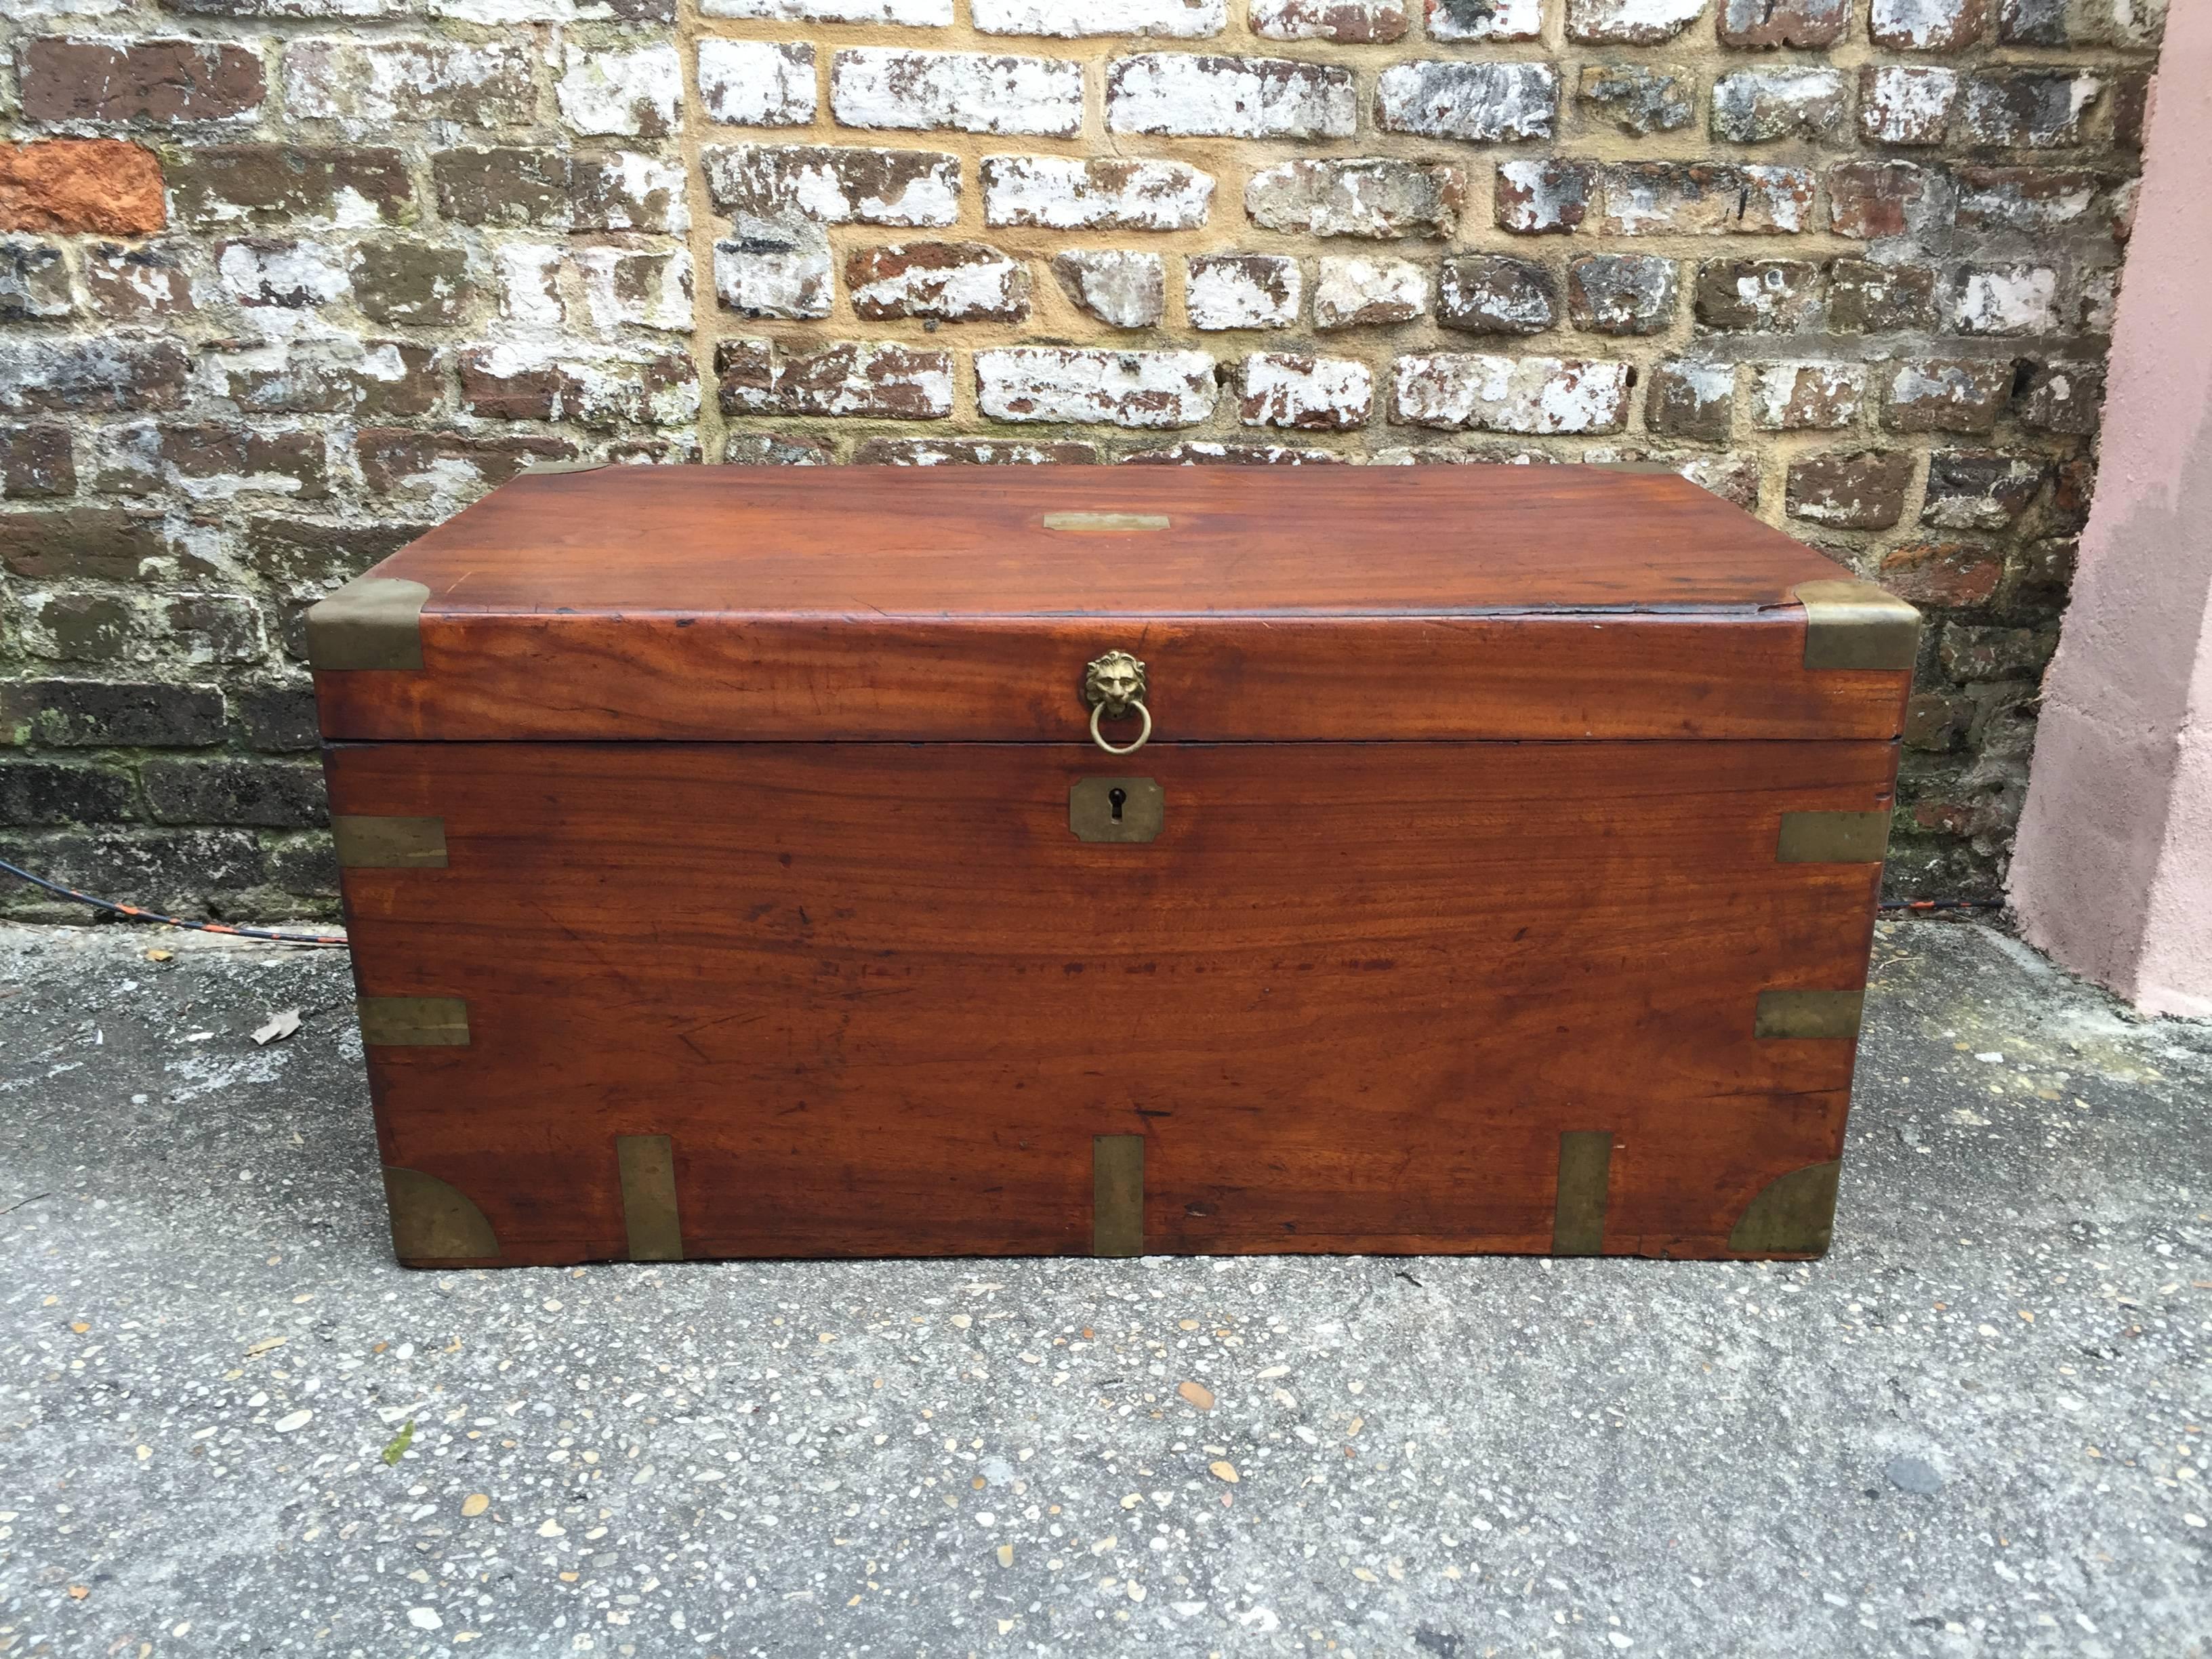 English camphor shipping trunk late 19th century.